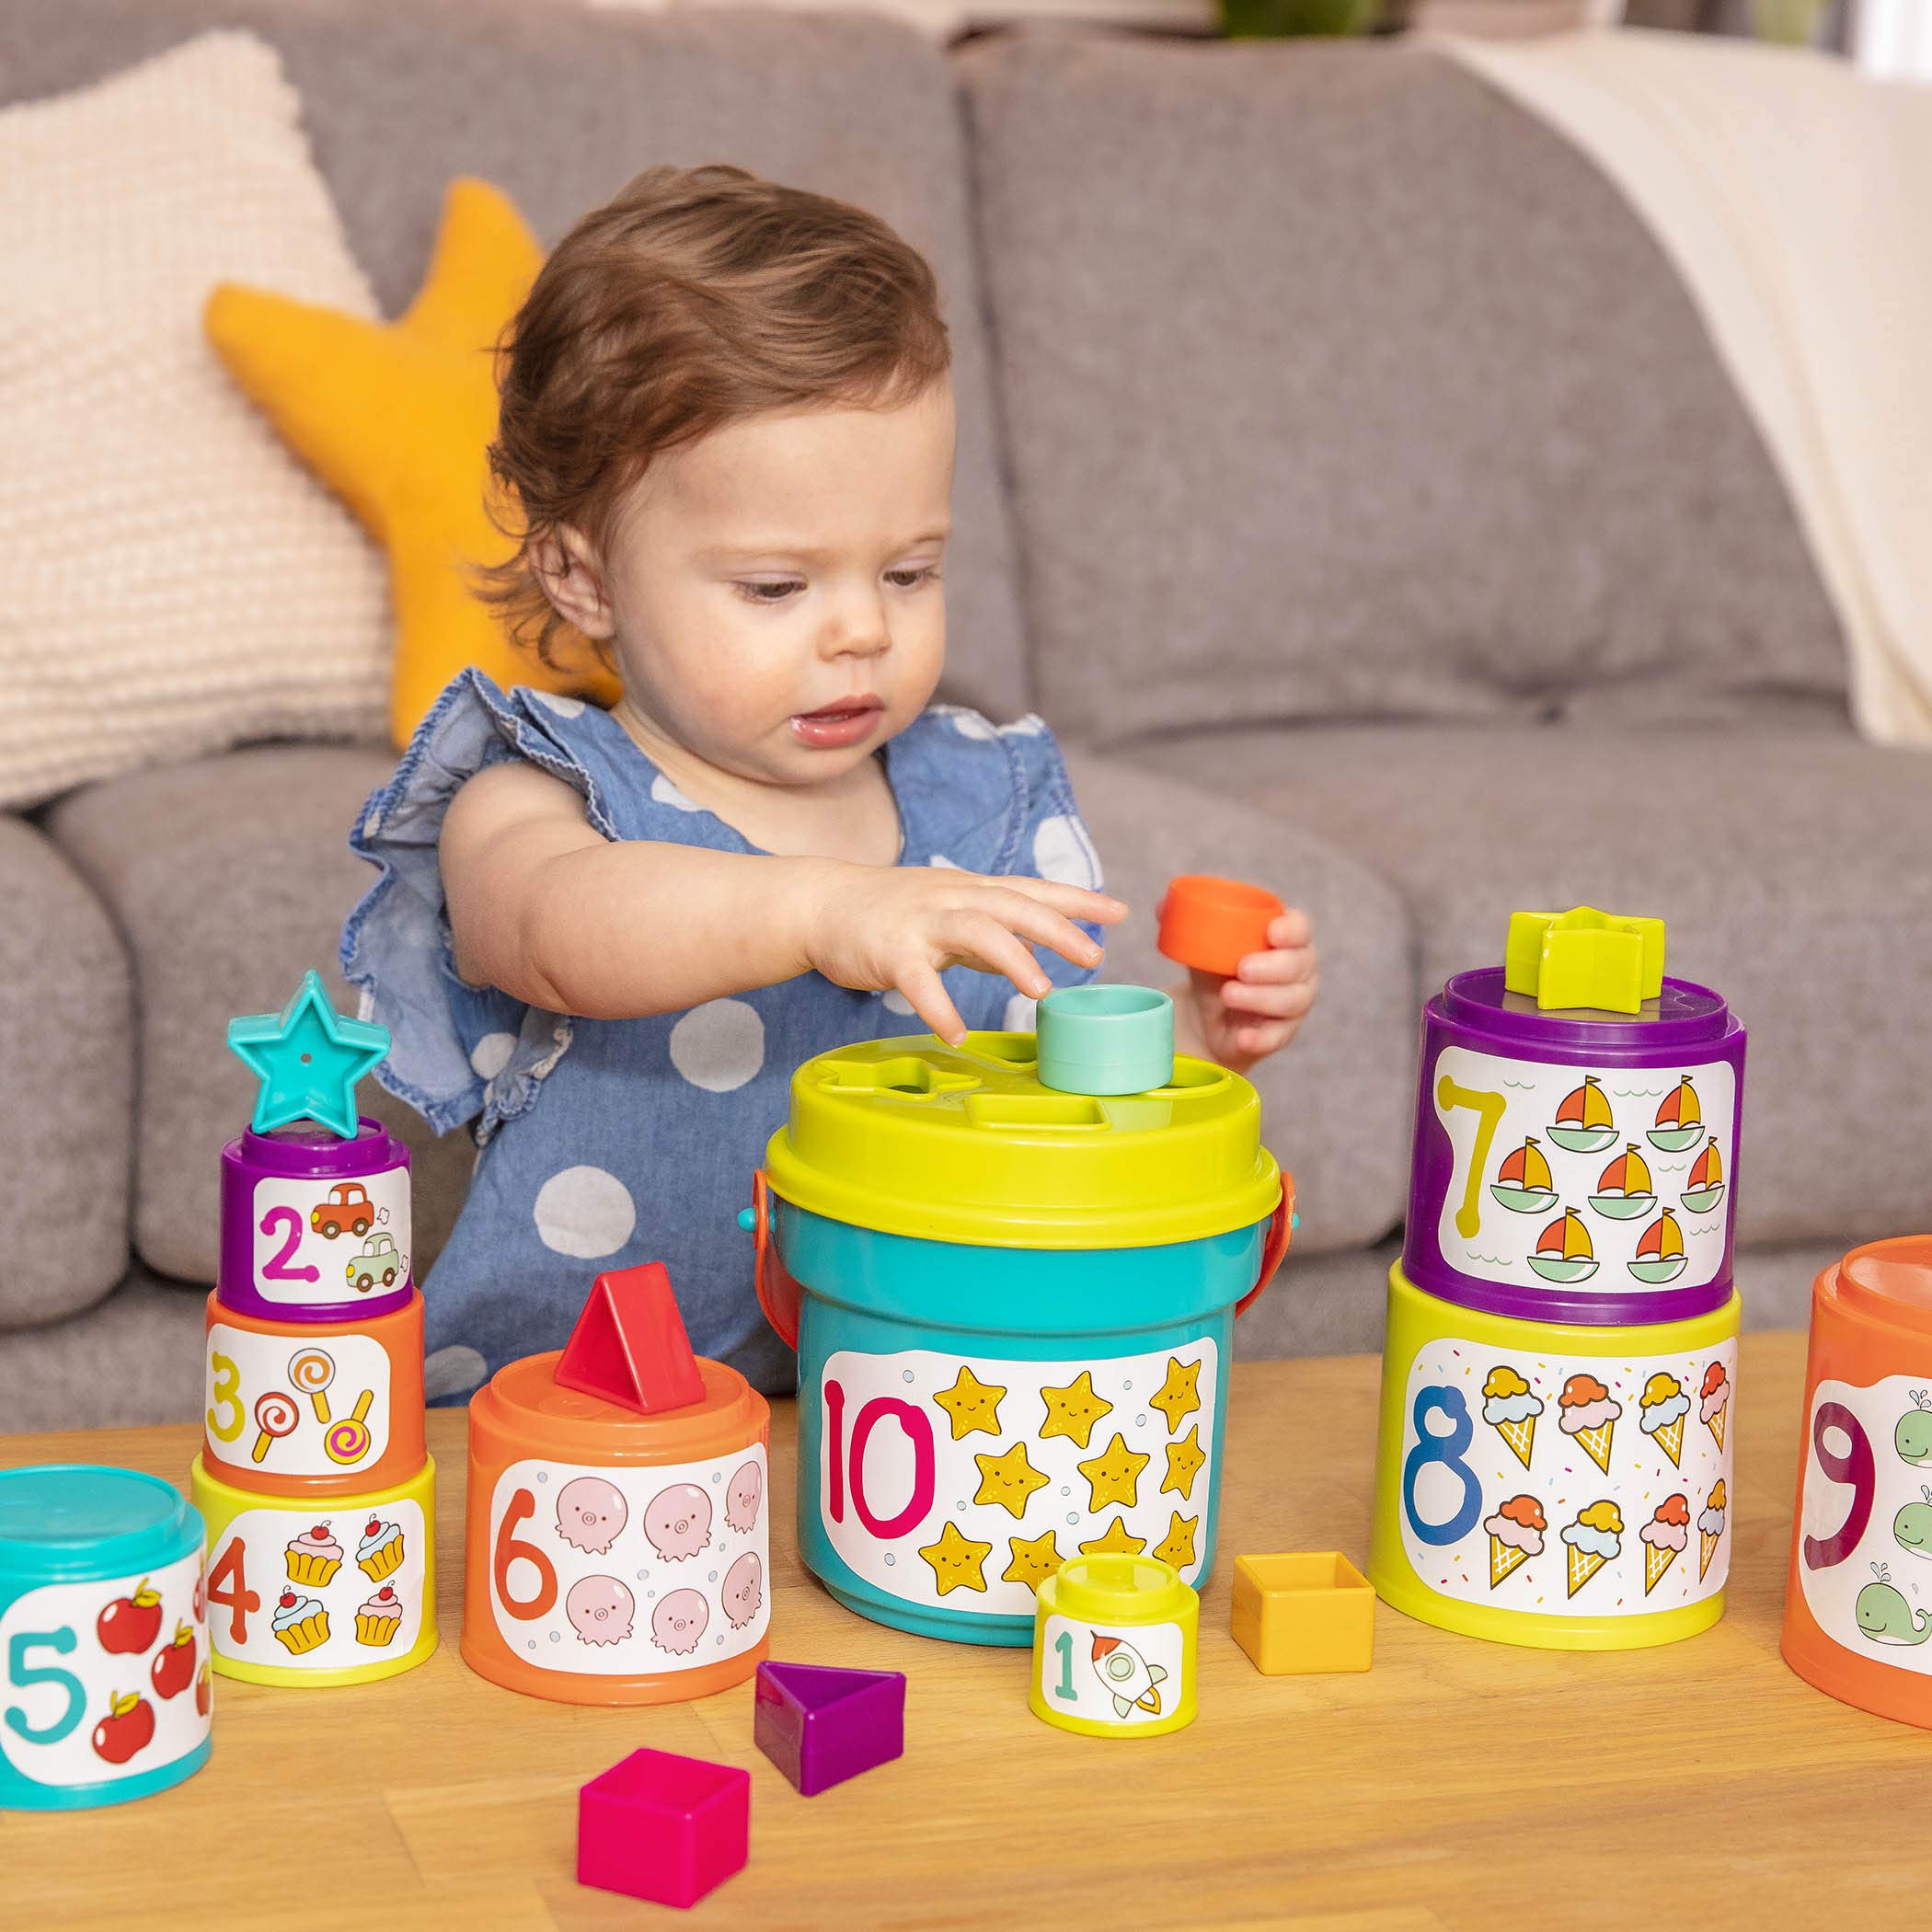 Battat Stacking Cups for Toddlers and Babies, Colorful Indoor and Outdoor Educational Toys for Sorting Shapes and Nesting Cups, Beach Toys for 18+ Months Old (19 Pcs)